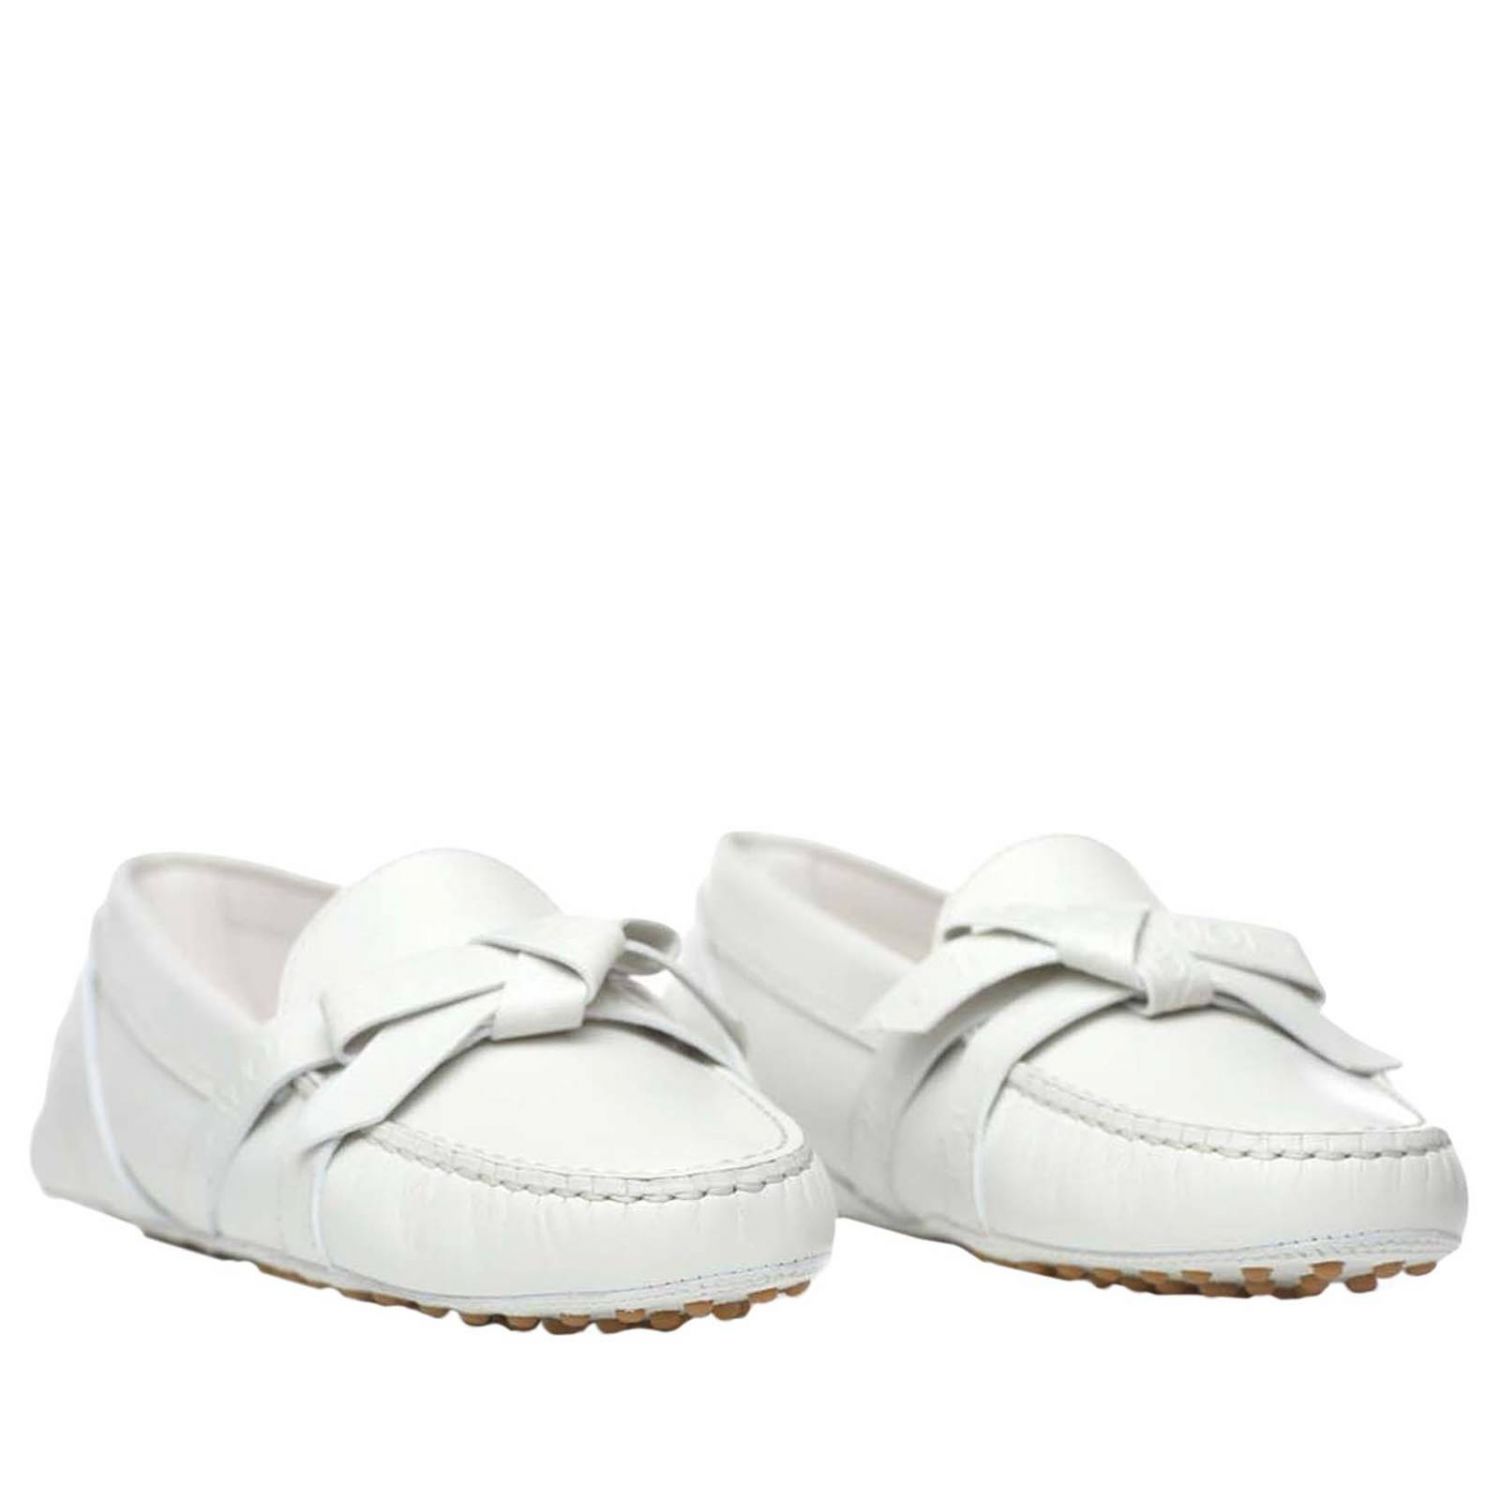 Tods Outlet: Shoes women Tod's | Loafers Tods Women White | Loafers ...